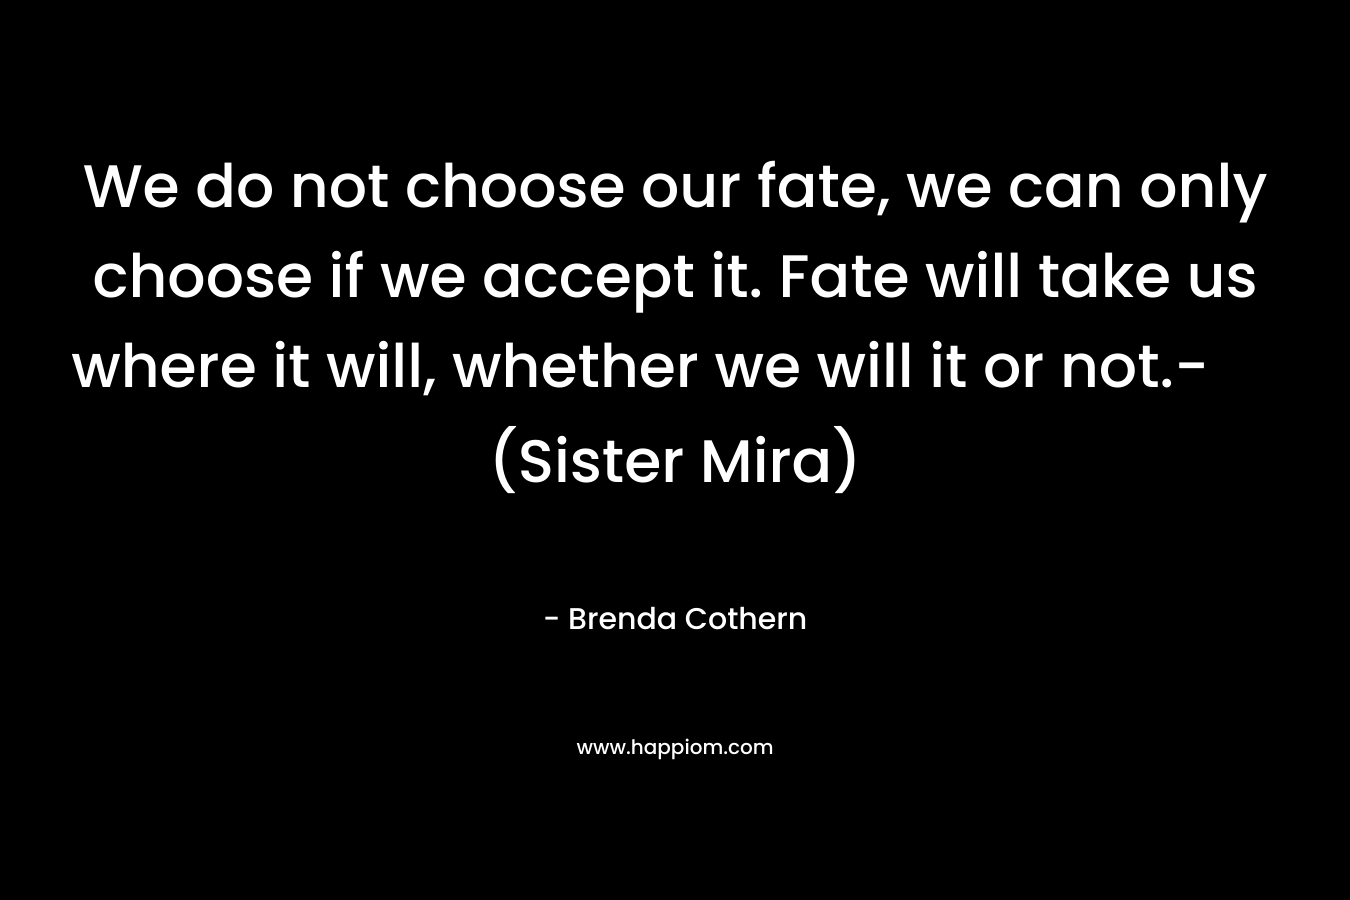 We do not choose our fate, we can only choose if we accept it. Fate will take us where it will, whether we will it or not.- (Sister Mira) – Brenda Cothern